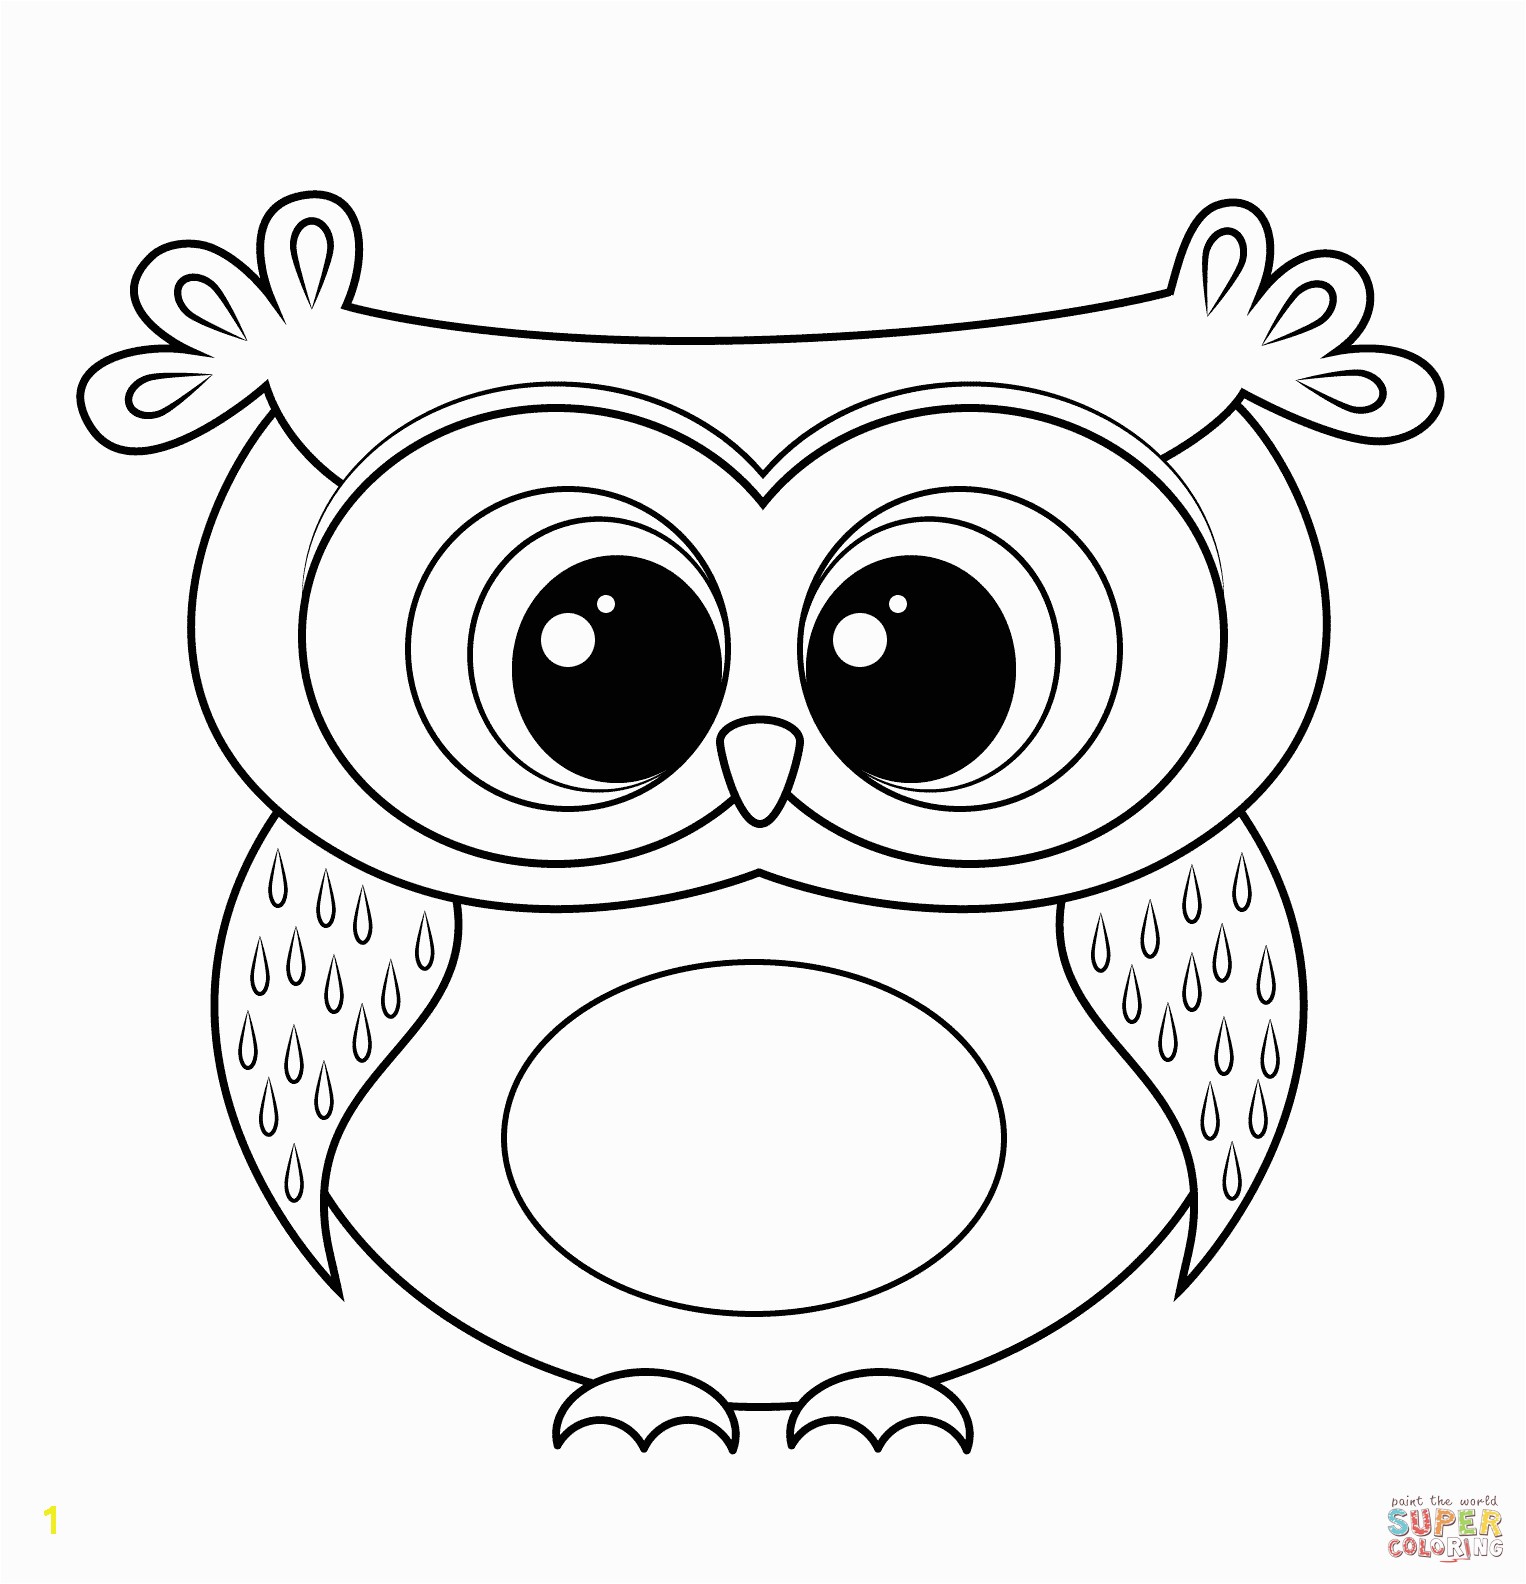 Cute Owl Coloring Pages Cartoon Owl Coloring Page Free Printable Coloring Pages